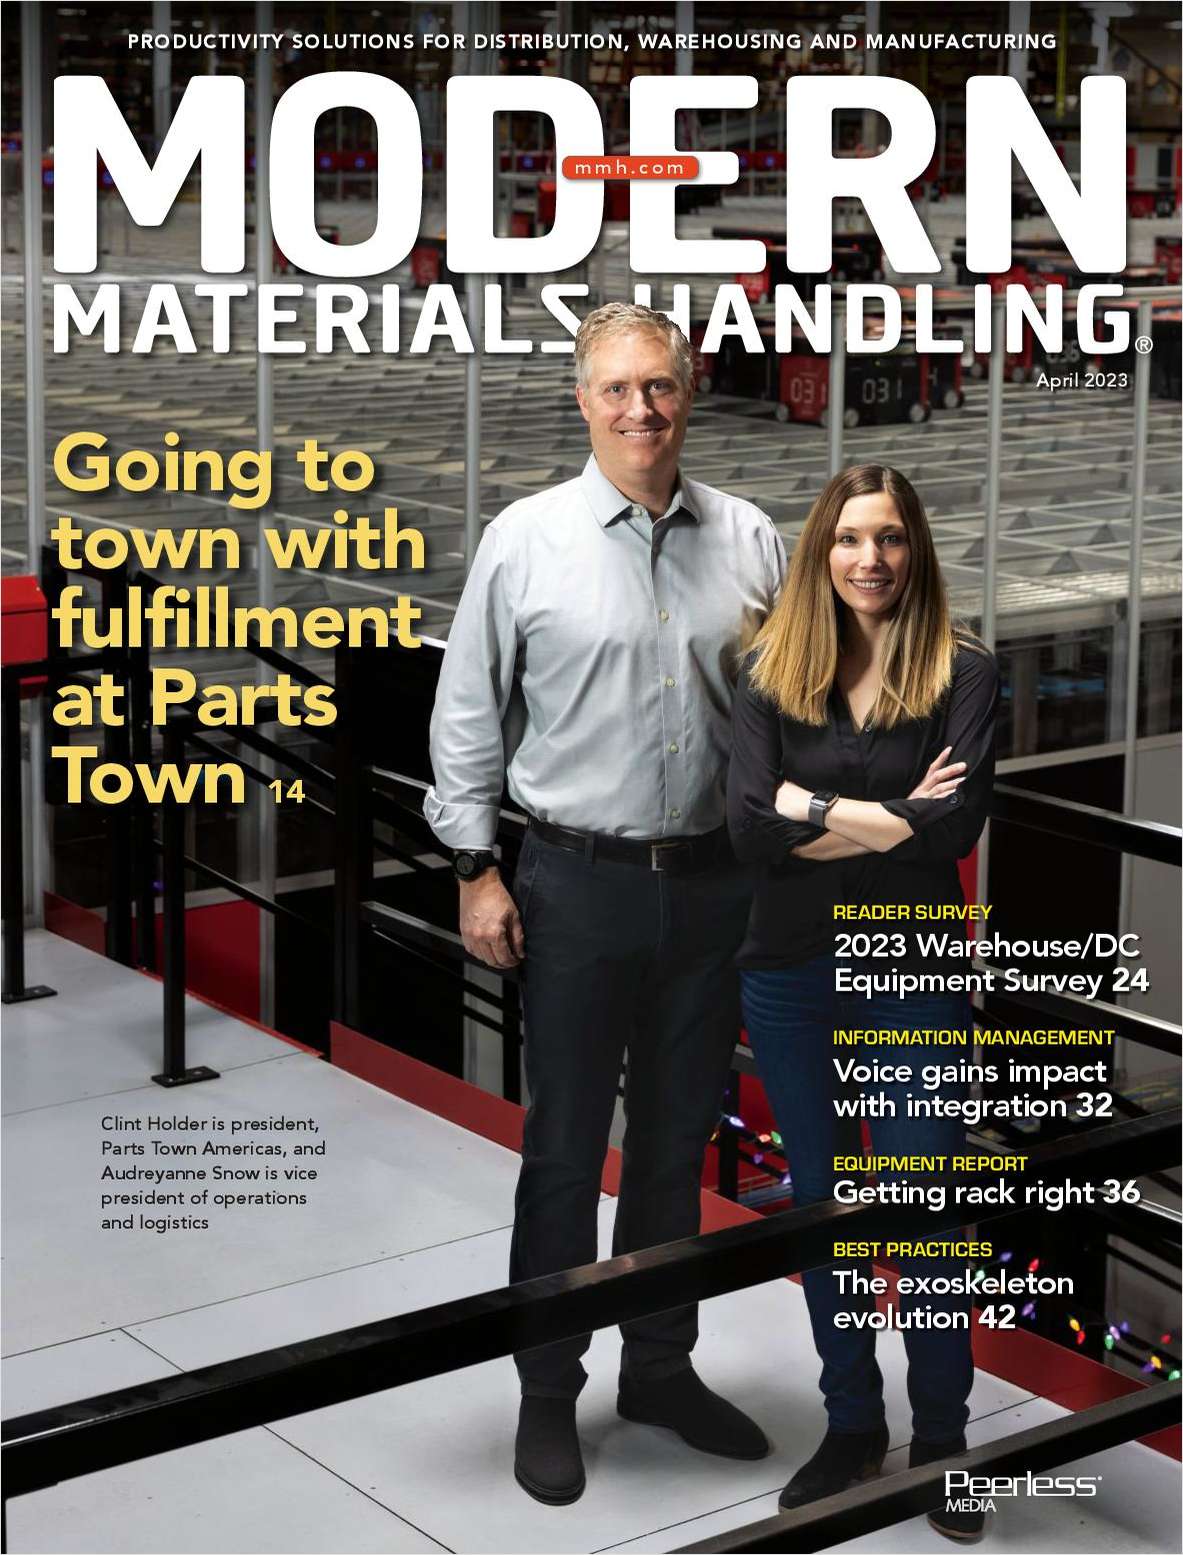 Modern Materials Handling: Going to town with fulfillment at Parts Town